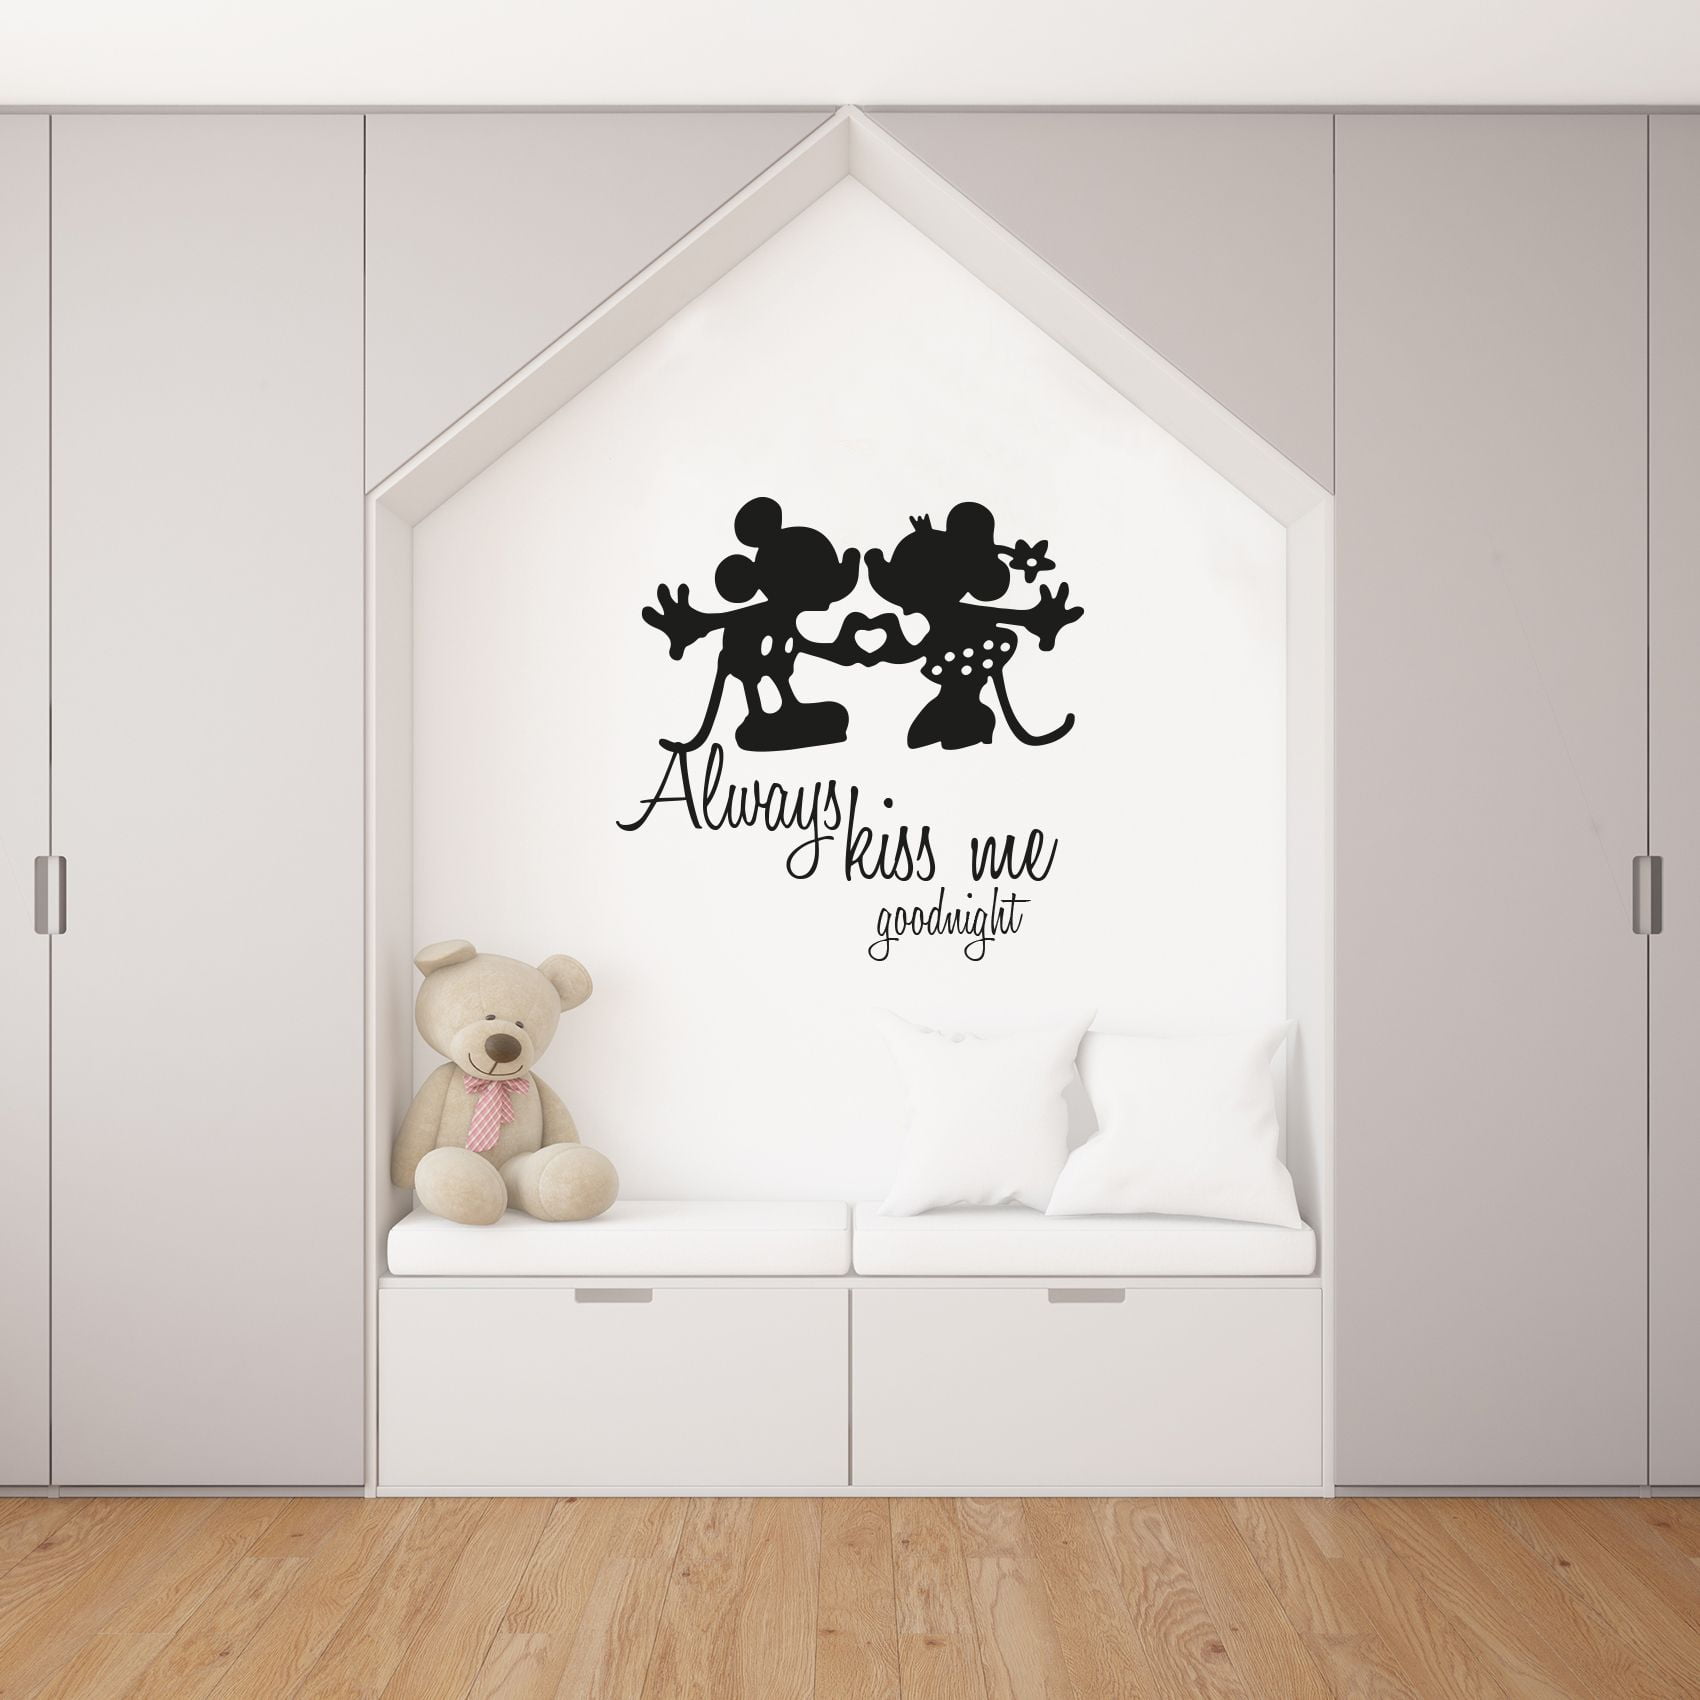 Sweet Dreams Sleep Tight Good Night Quote Mickey Mouse Vinyl Wall Sticker Decal 